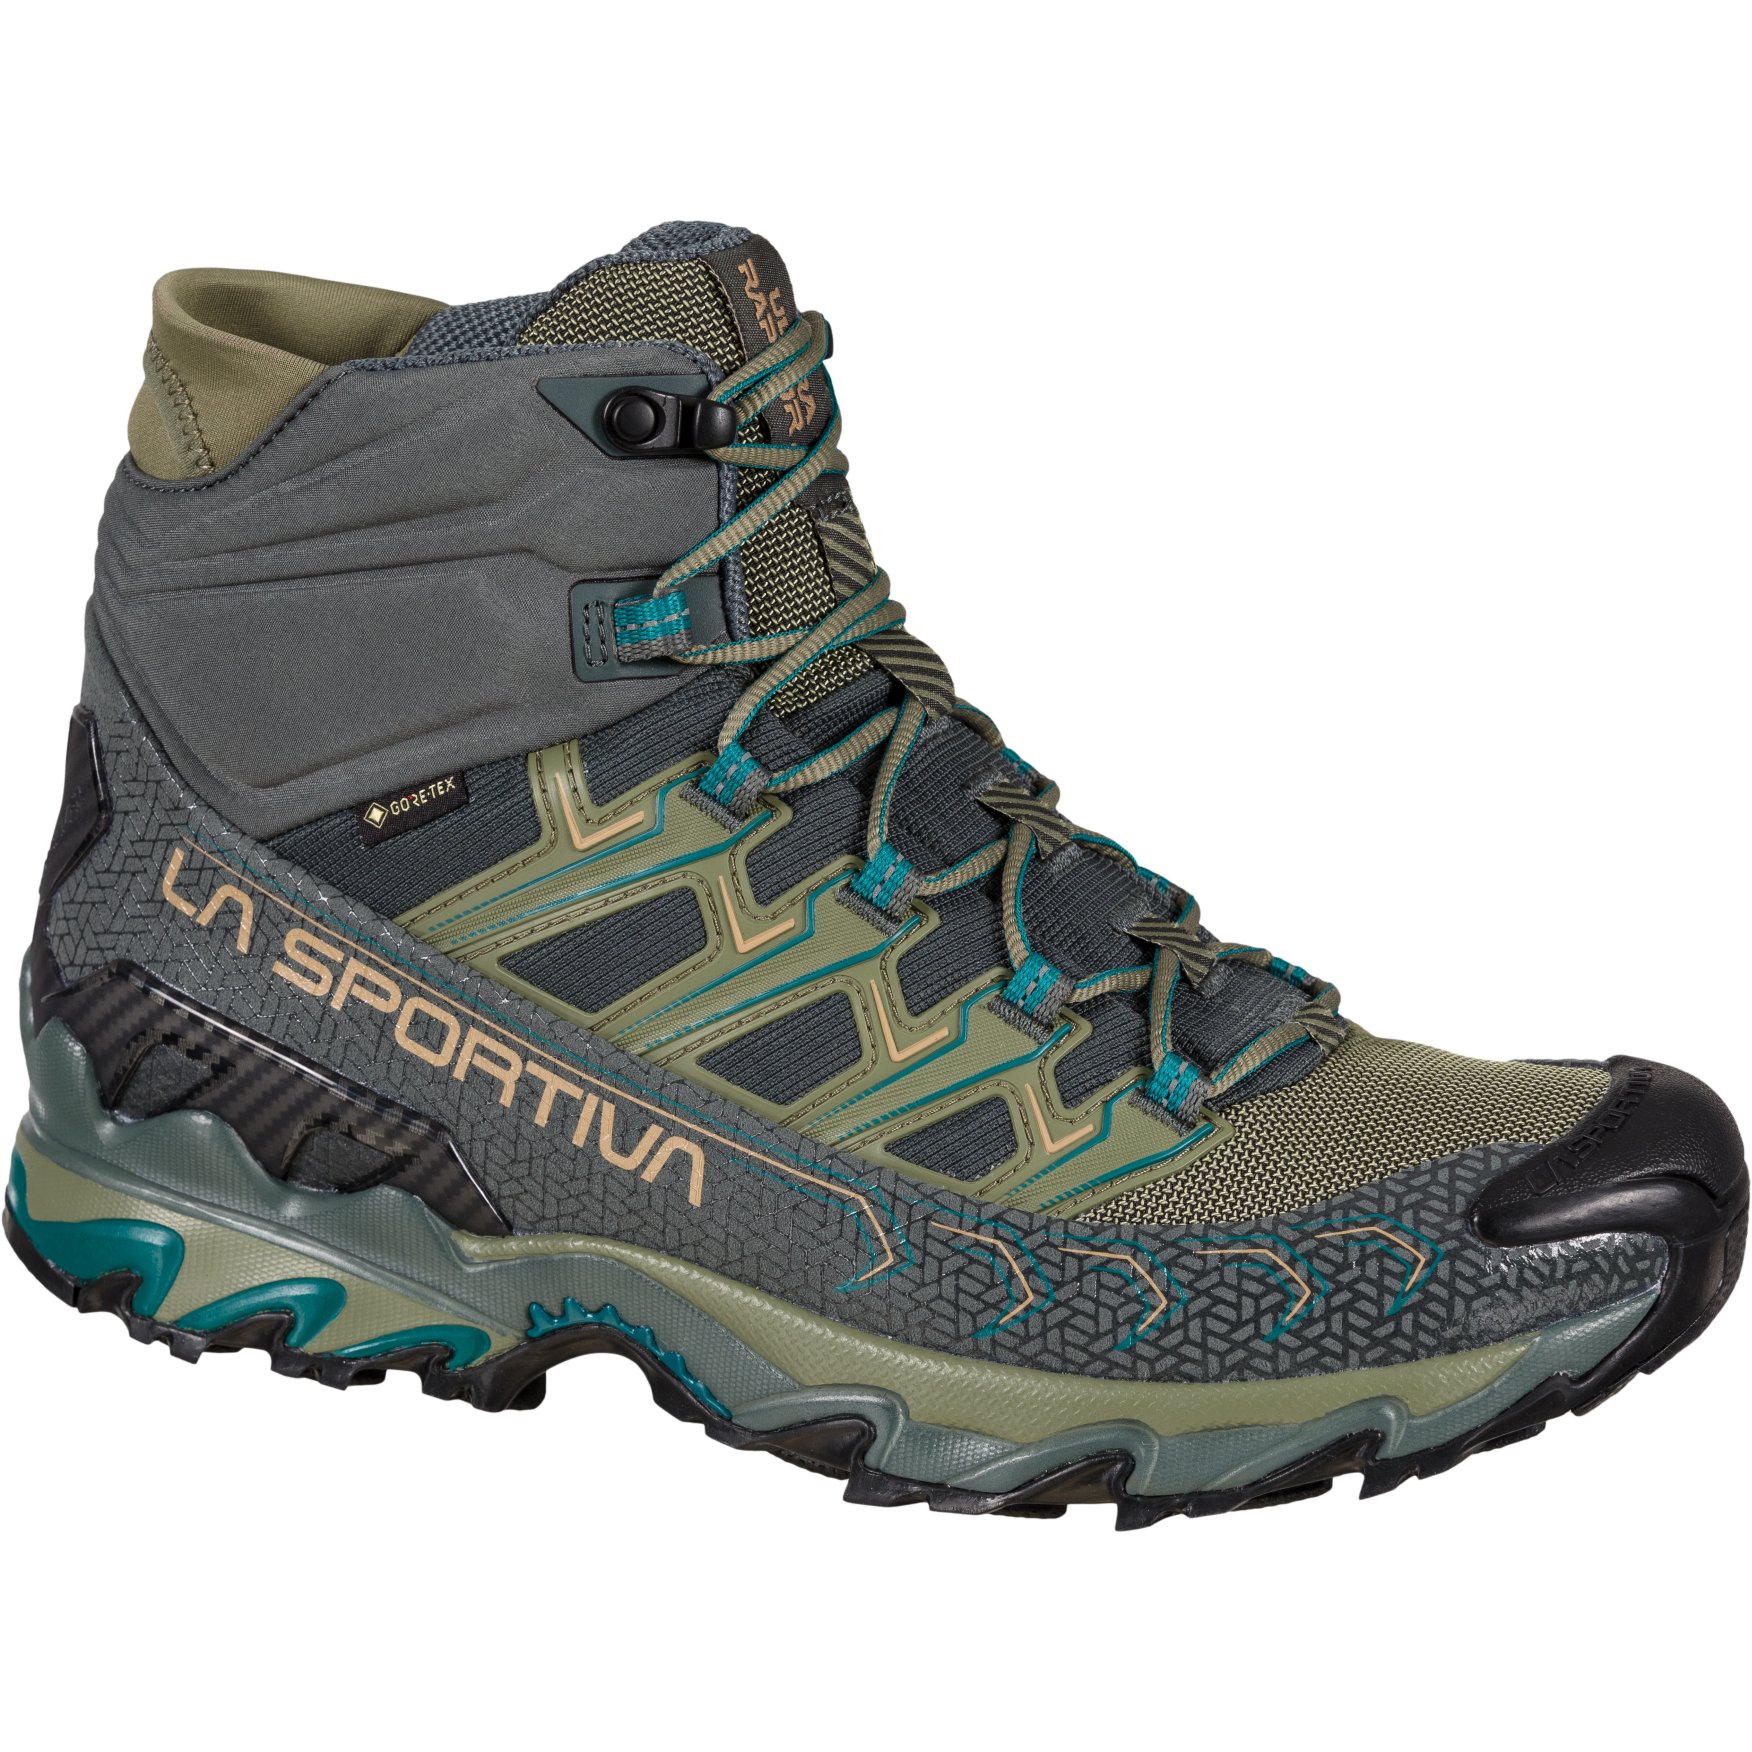 Picture of La Sportiva Ultra Raptor II Mid GTX Hiking Shoes - Charcoal/Lichen